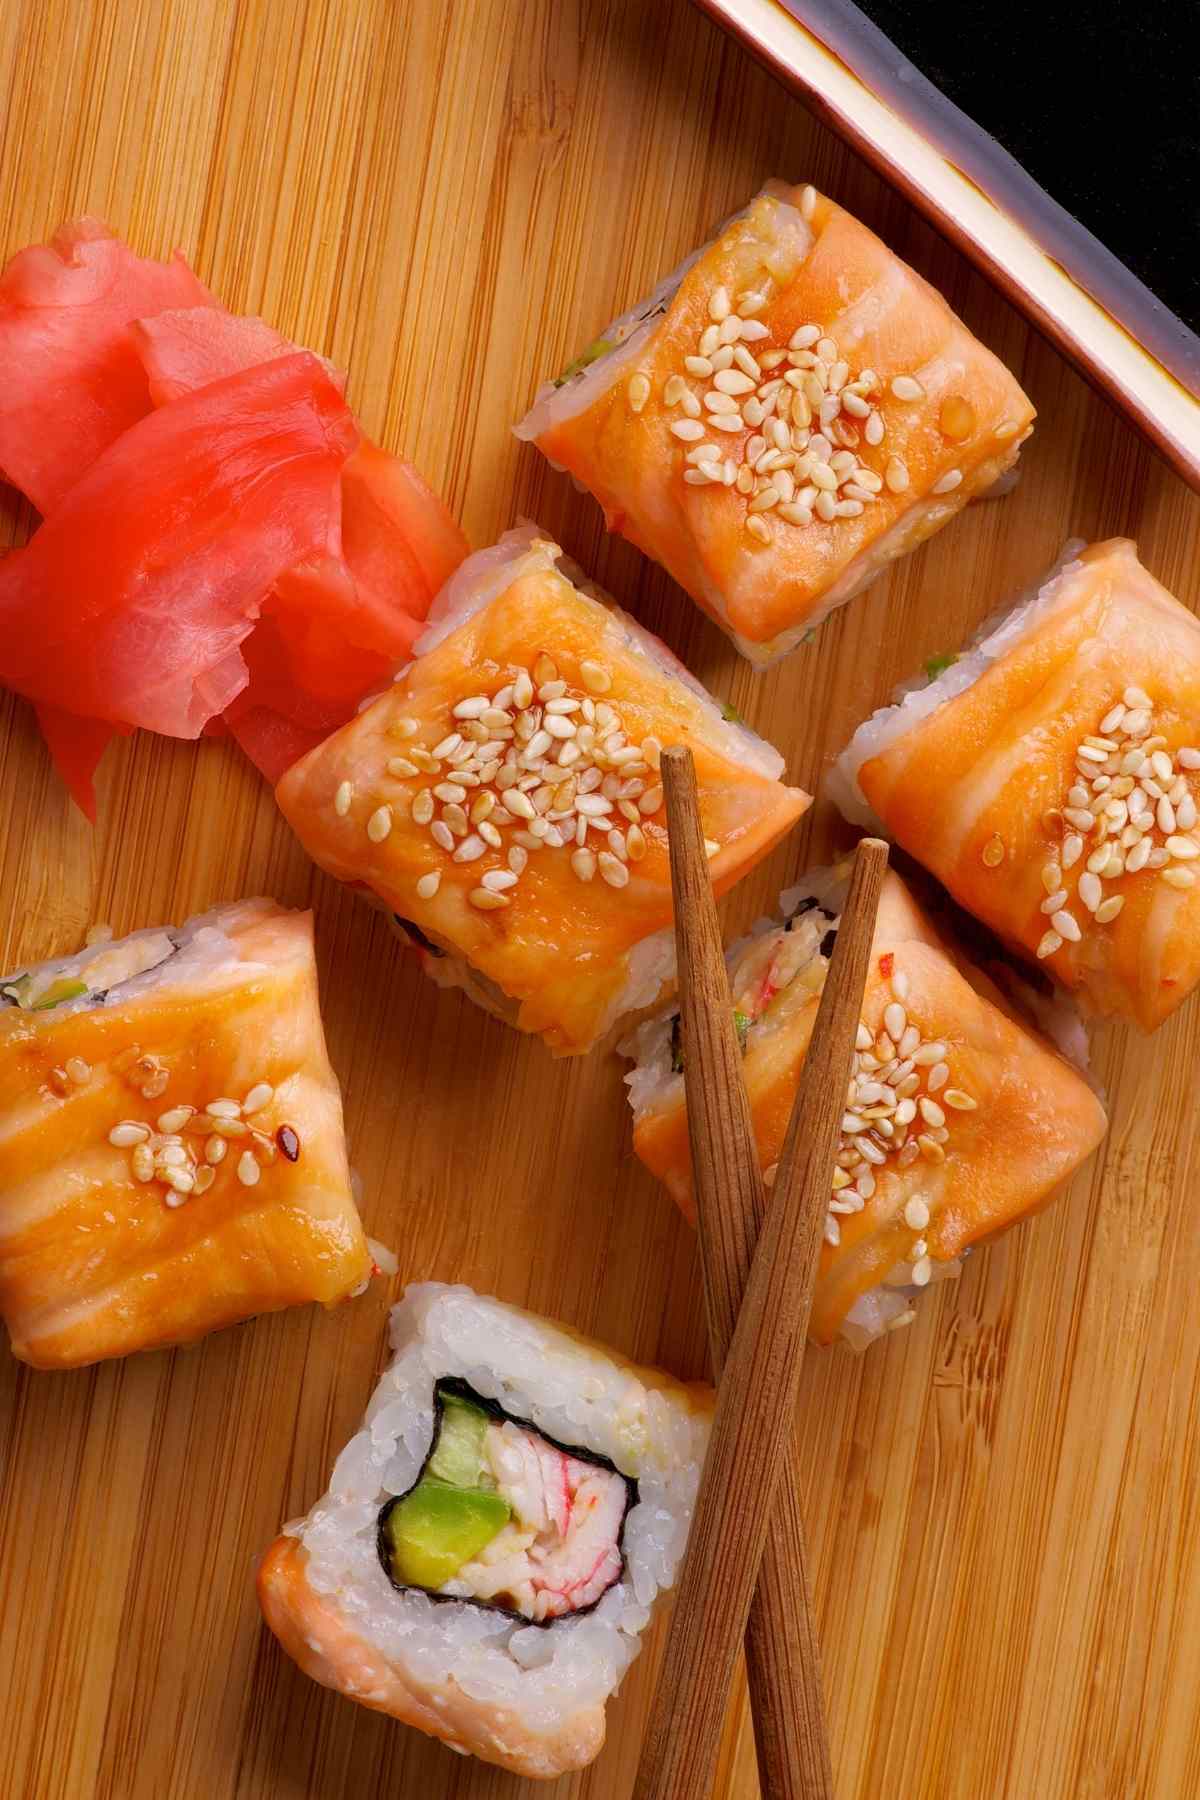 It's easier to make sushi at home than you might think and this Alaska roll sushi is a truly tasty option for a protein-packed appetizer or light dinner.